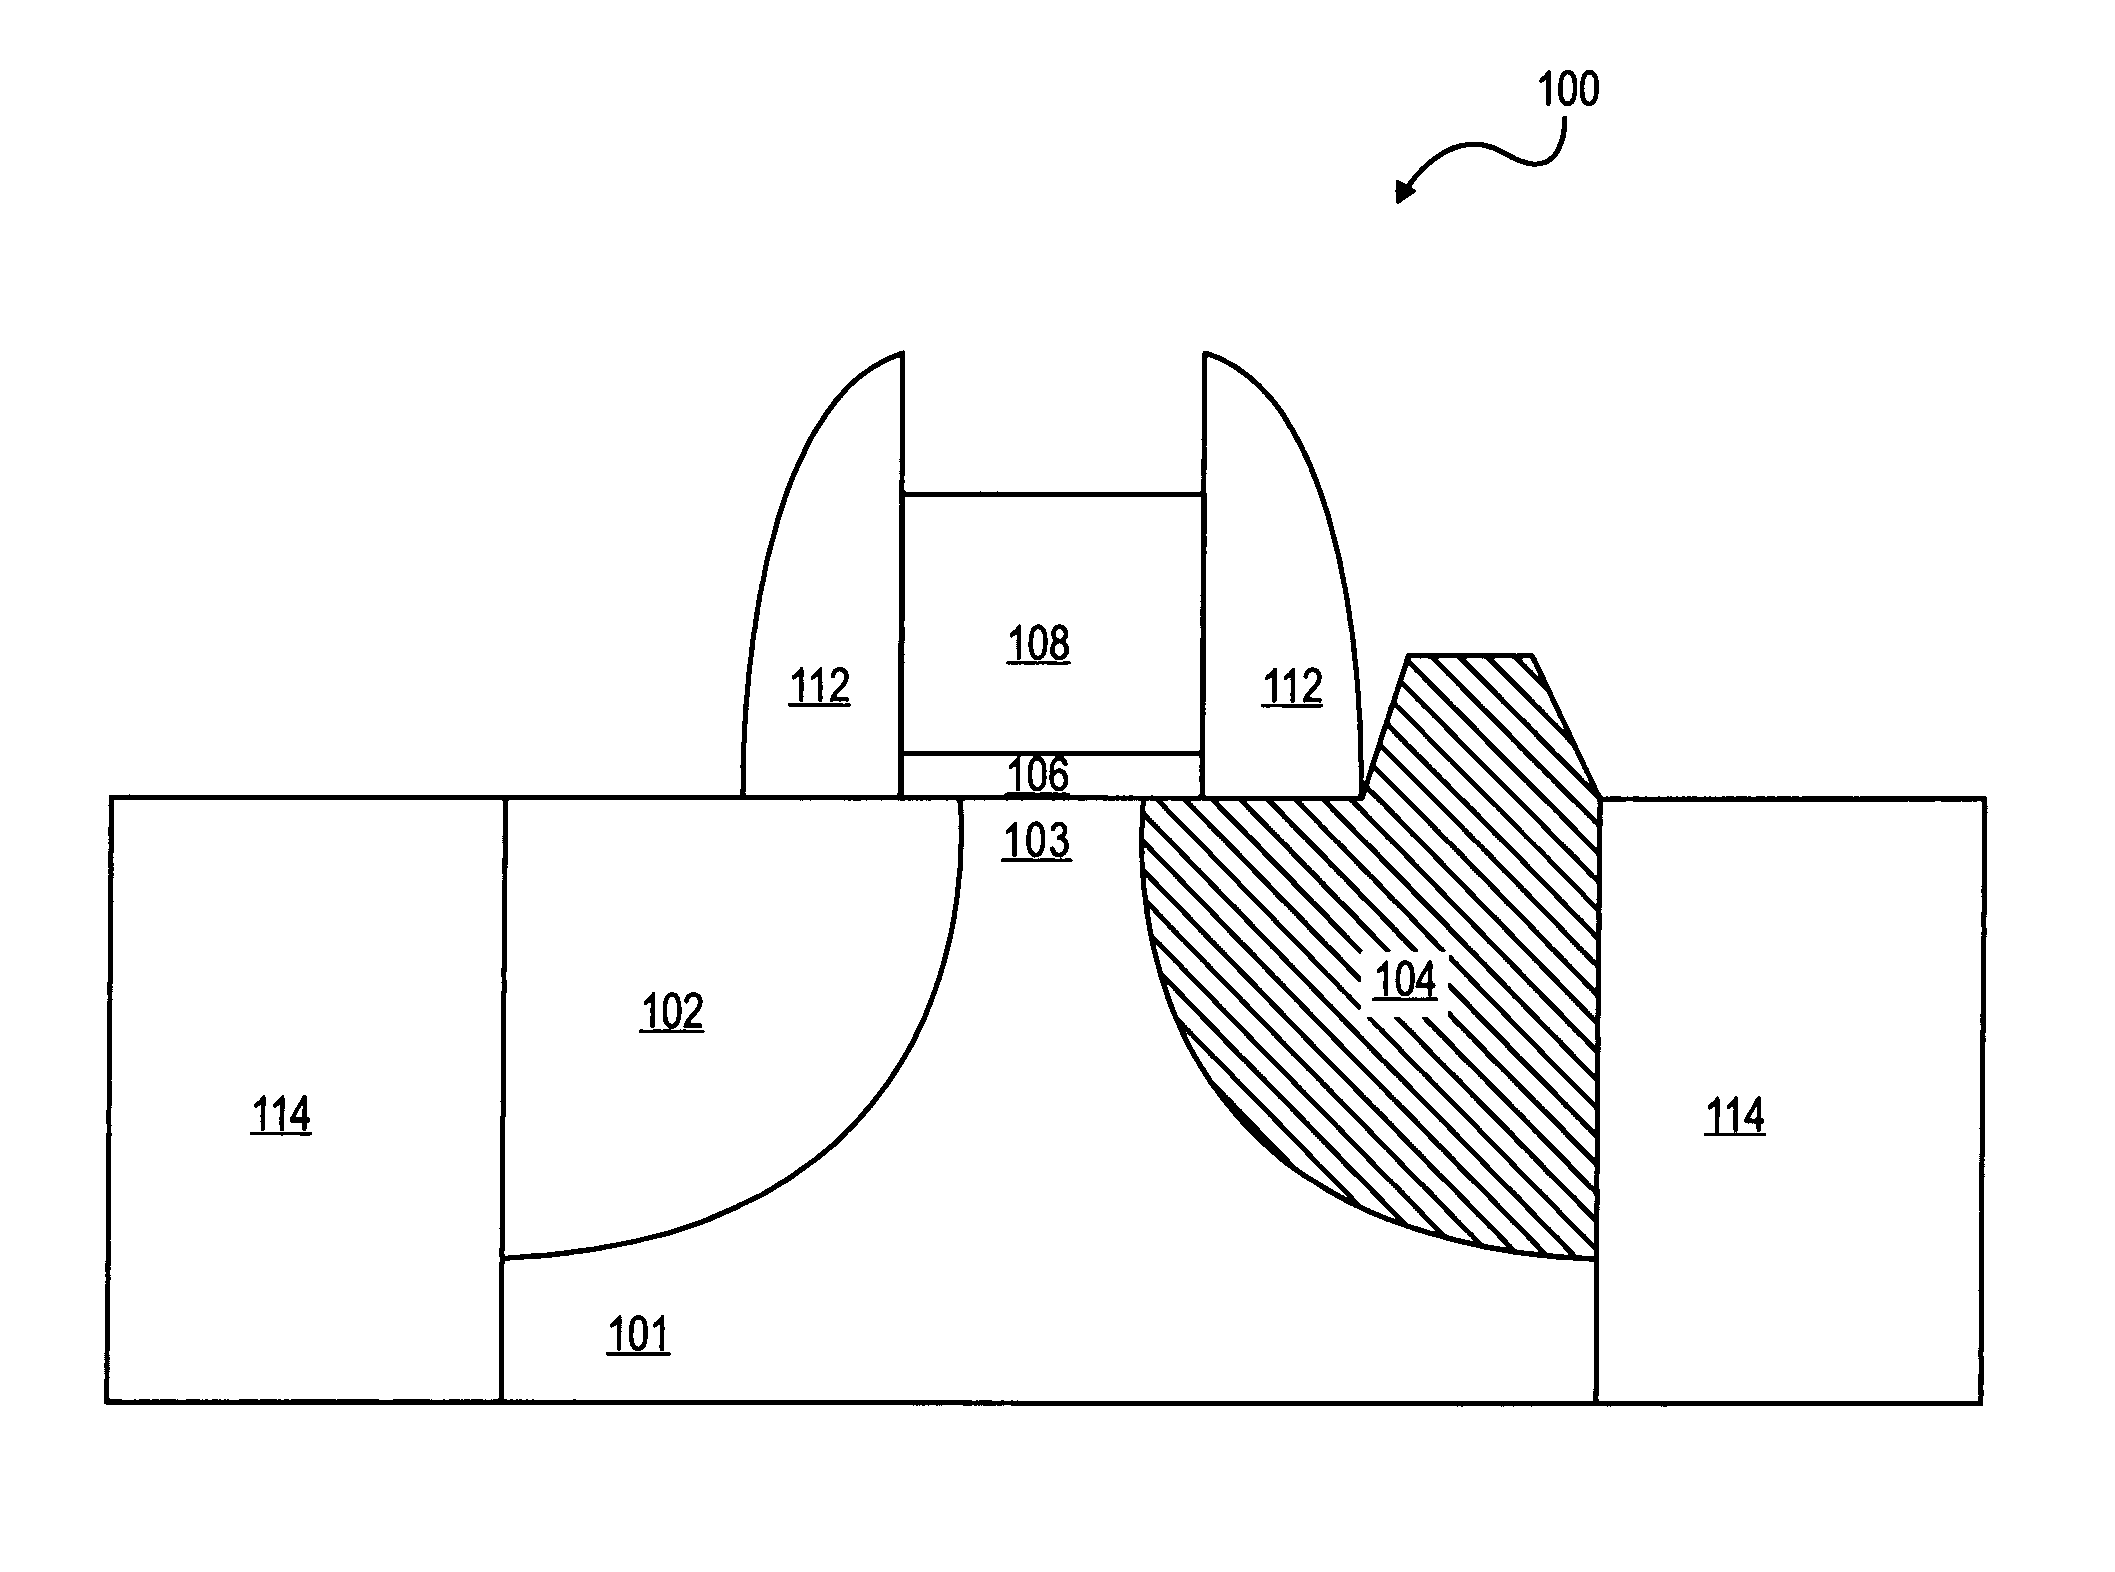 Tunneling field effect transistor using angled implants for forming asymmetric source/drain regions